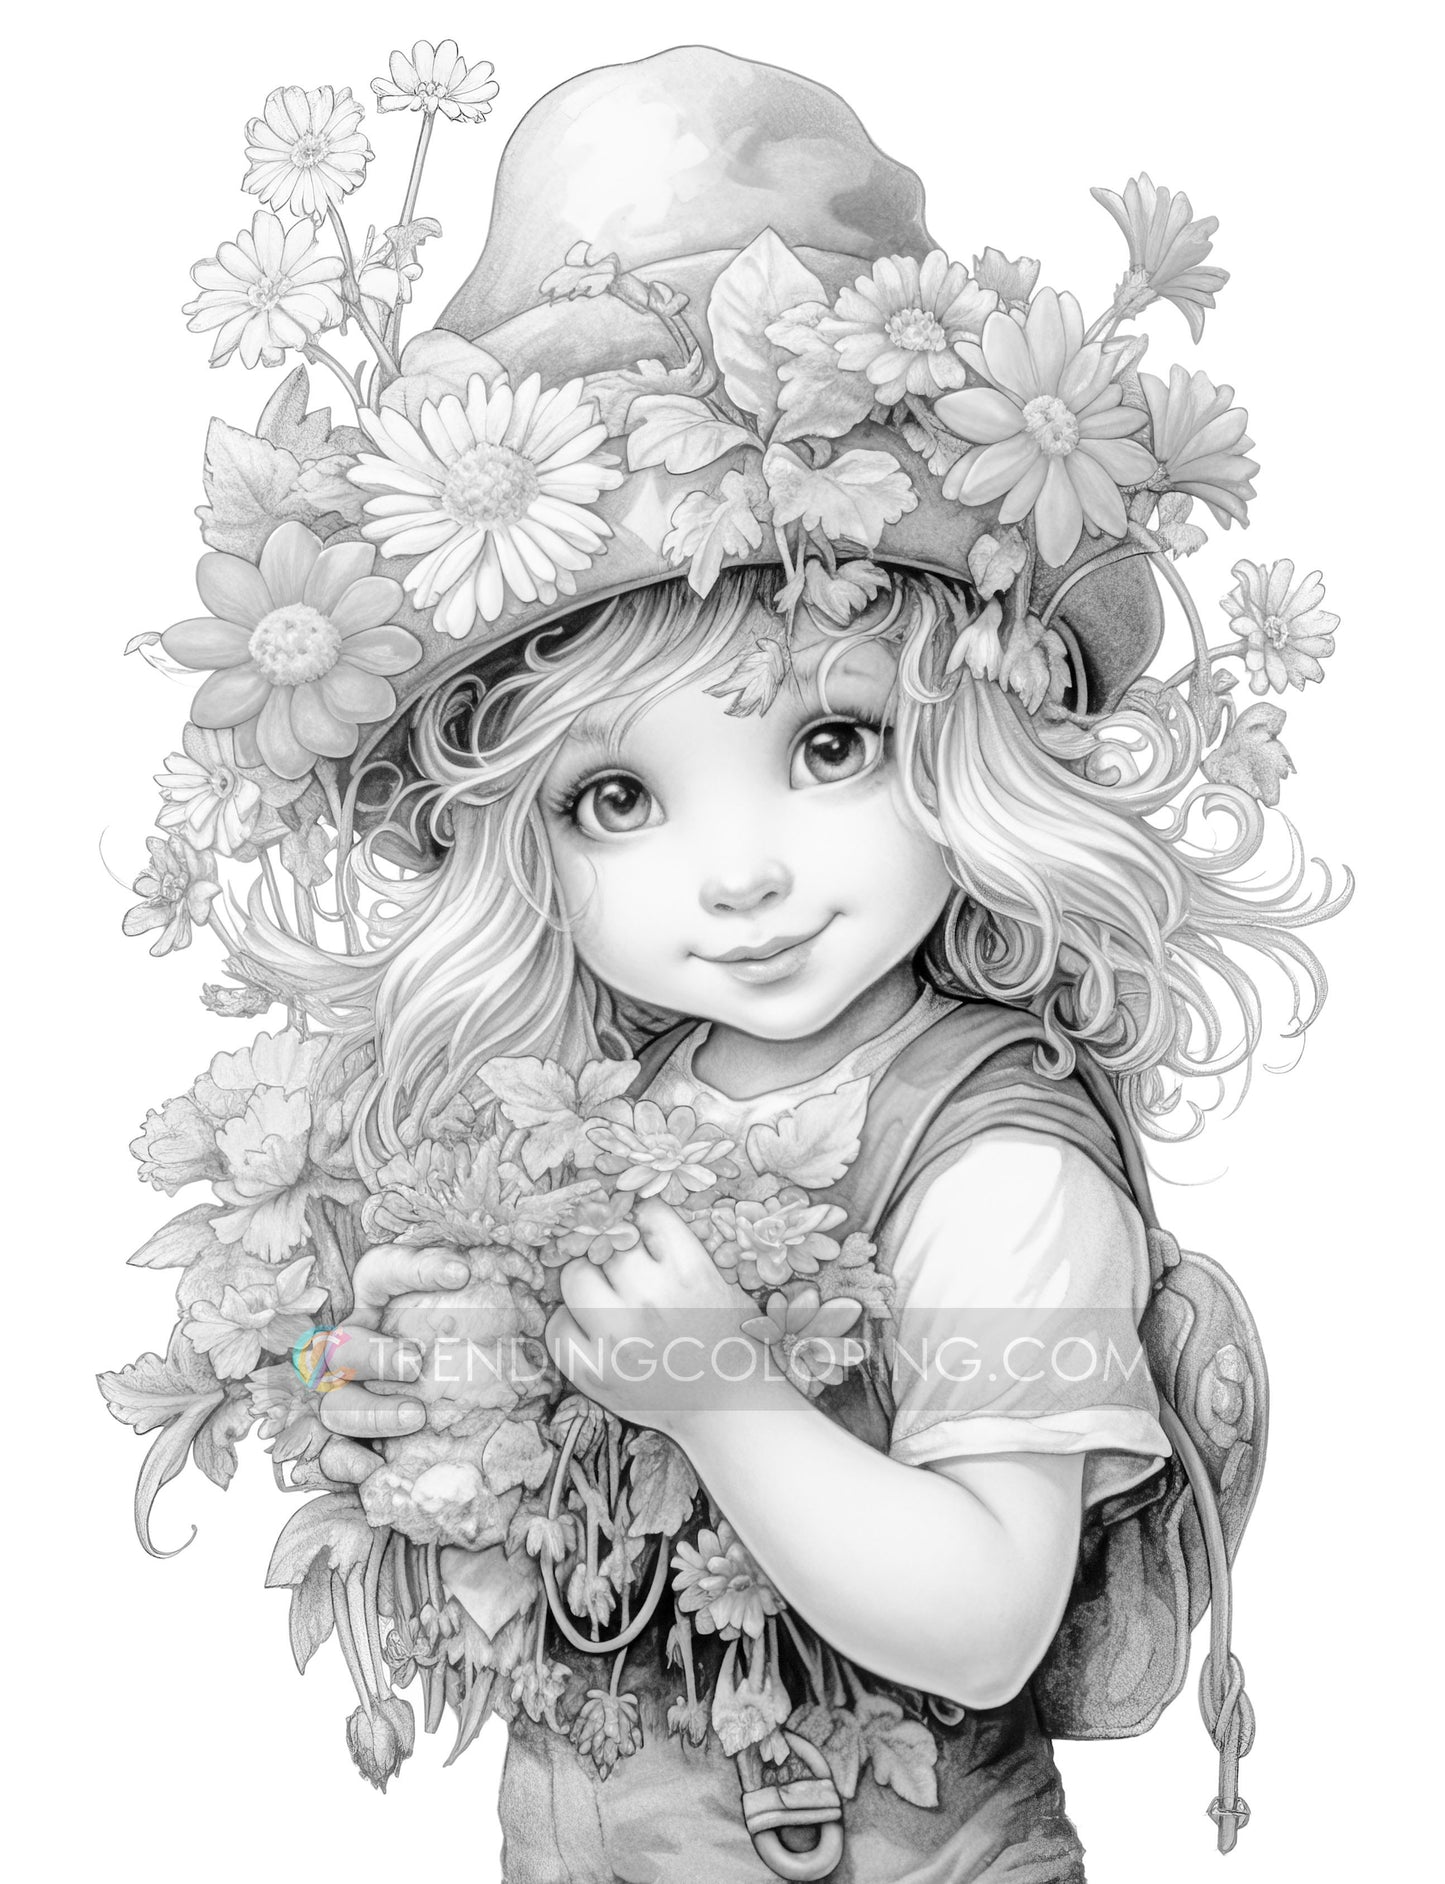 25 Adorable Gnome Girls Grayscale Coloring Pages - Instant Download - Printable Dark/Light